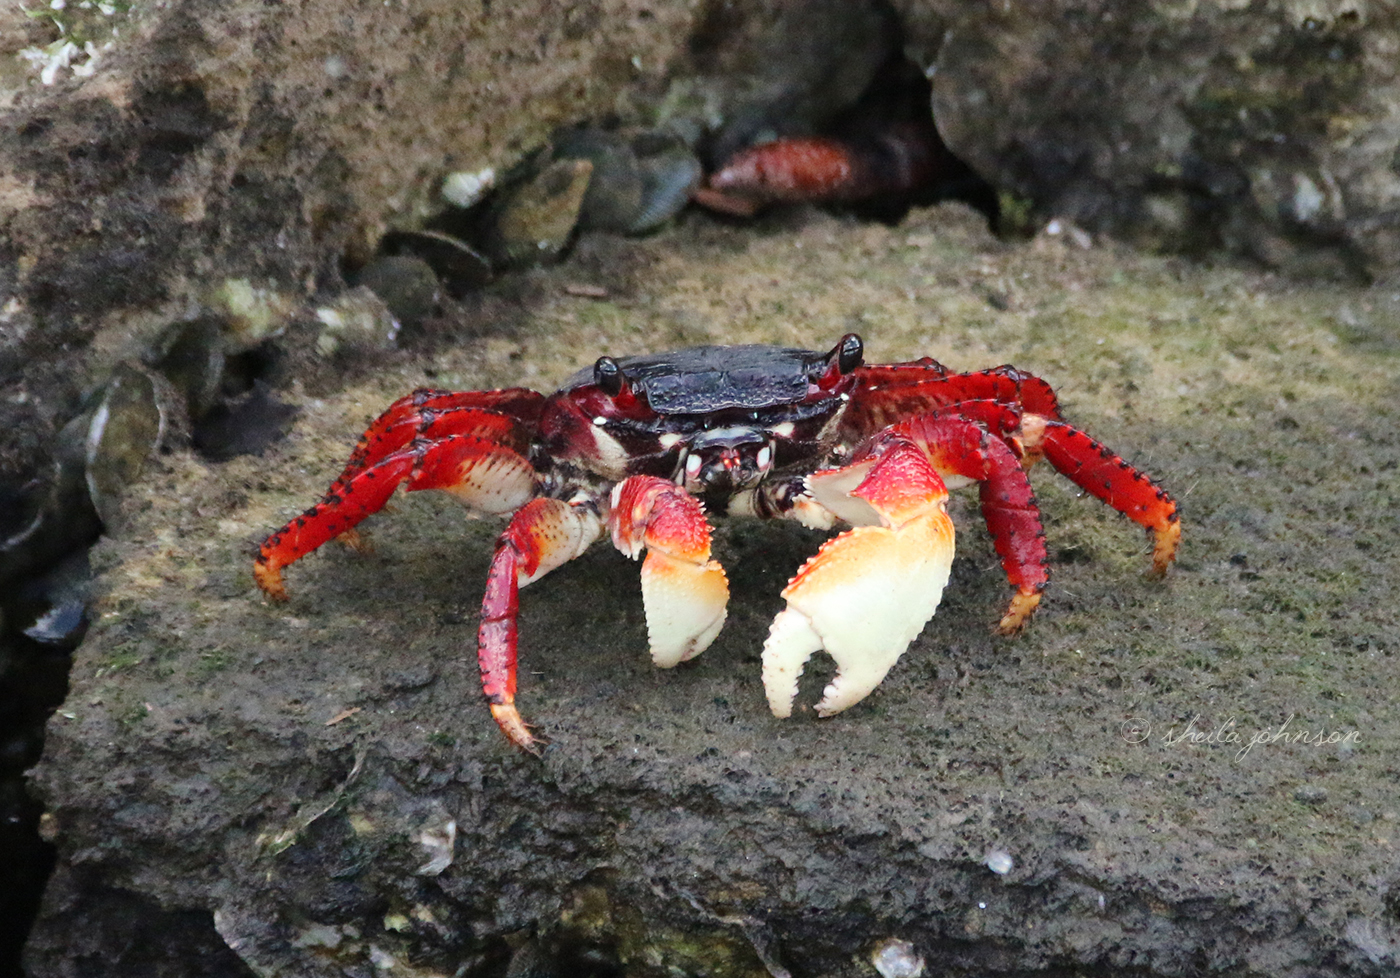 We Found This Red-Legged Crab In Downtown Stuart Along The Riverwalk And Through This Would Be One Of Those Easily Identified Species. But, No. So Here's A Crab. Could Be Fiddler; Could Be Blue; Fresh Or Brackish Water, As In The St. Lucie River.